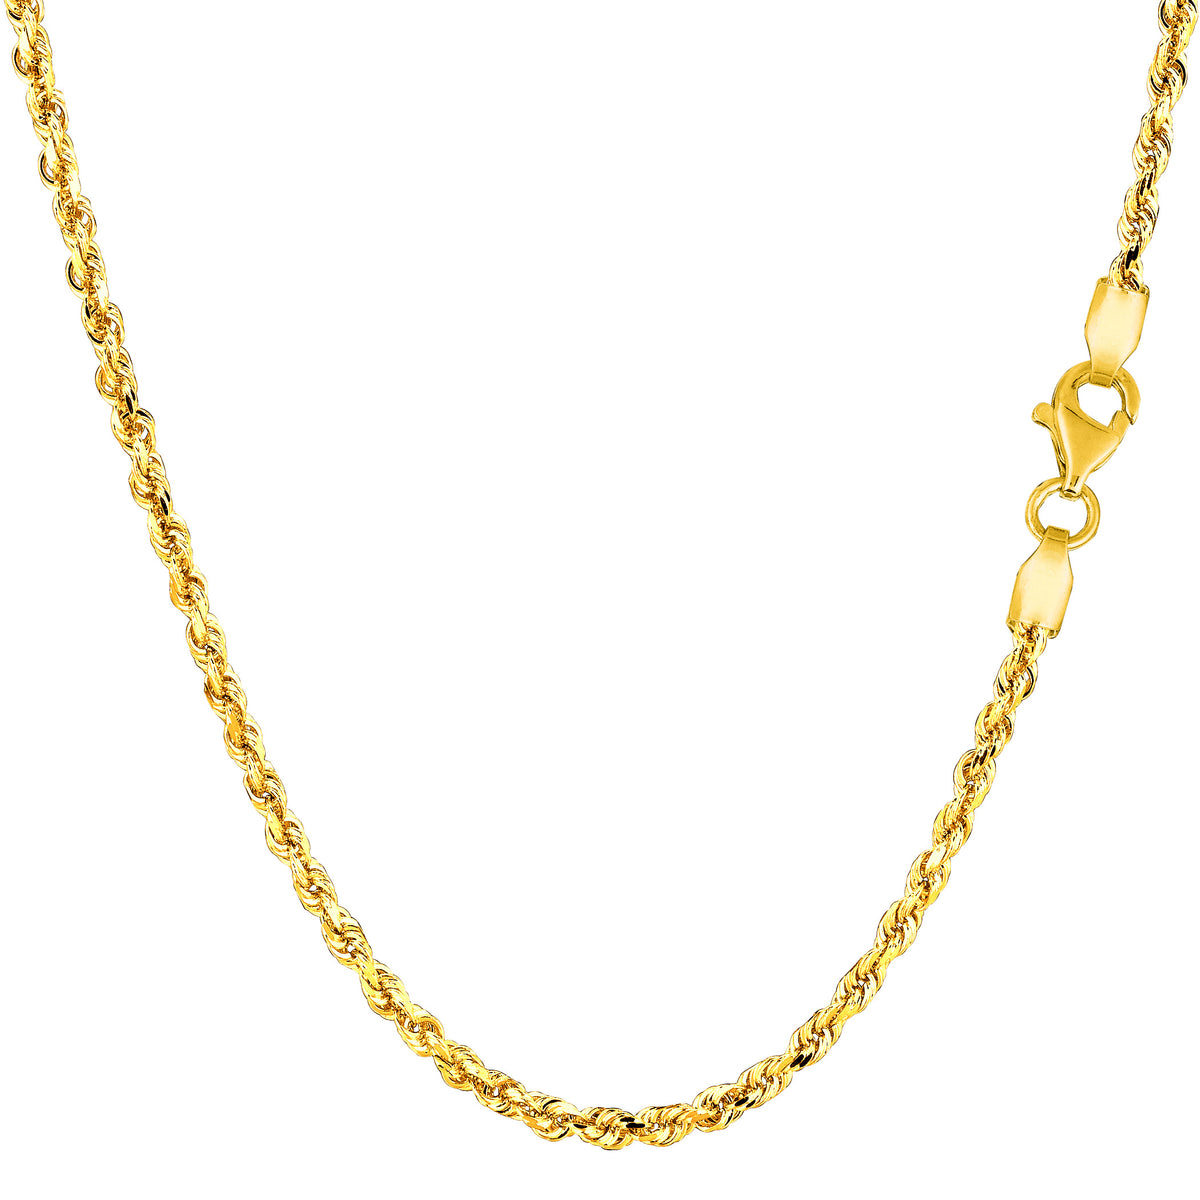 14K Yellow Gold Filled Solid Rope Chain Bracelet, 2.1mm, 8.5" fine designer jewelry for men and women